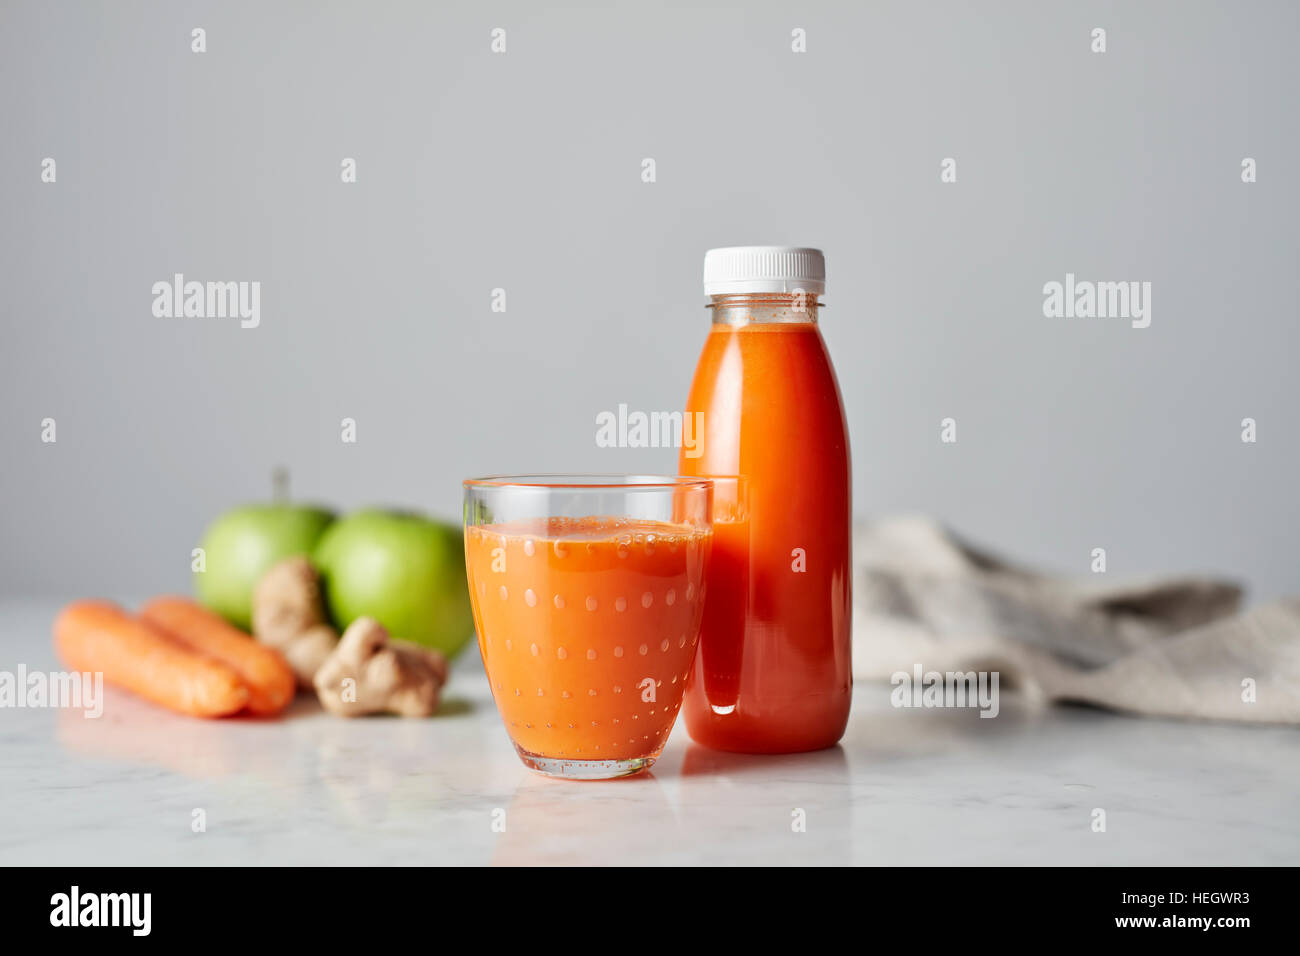 Carrot and Apple juice fresh healthy organic drinking glass plastic bottle Stock Photo